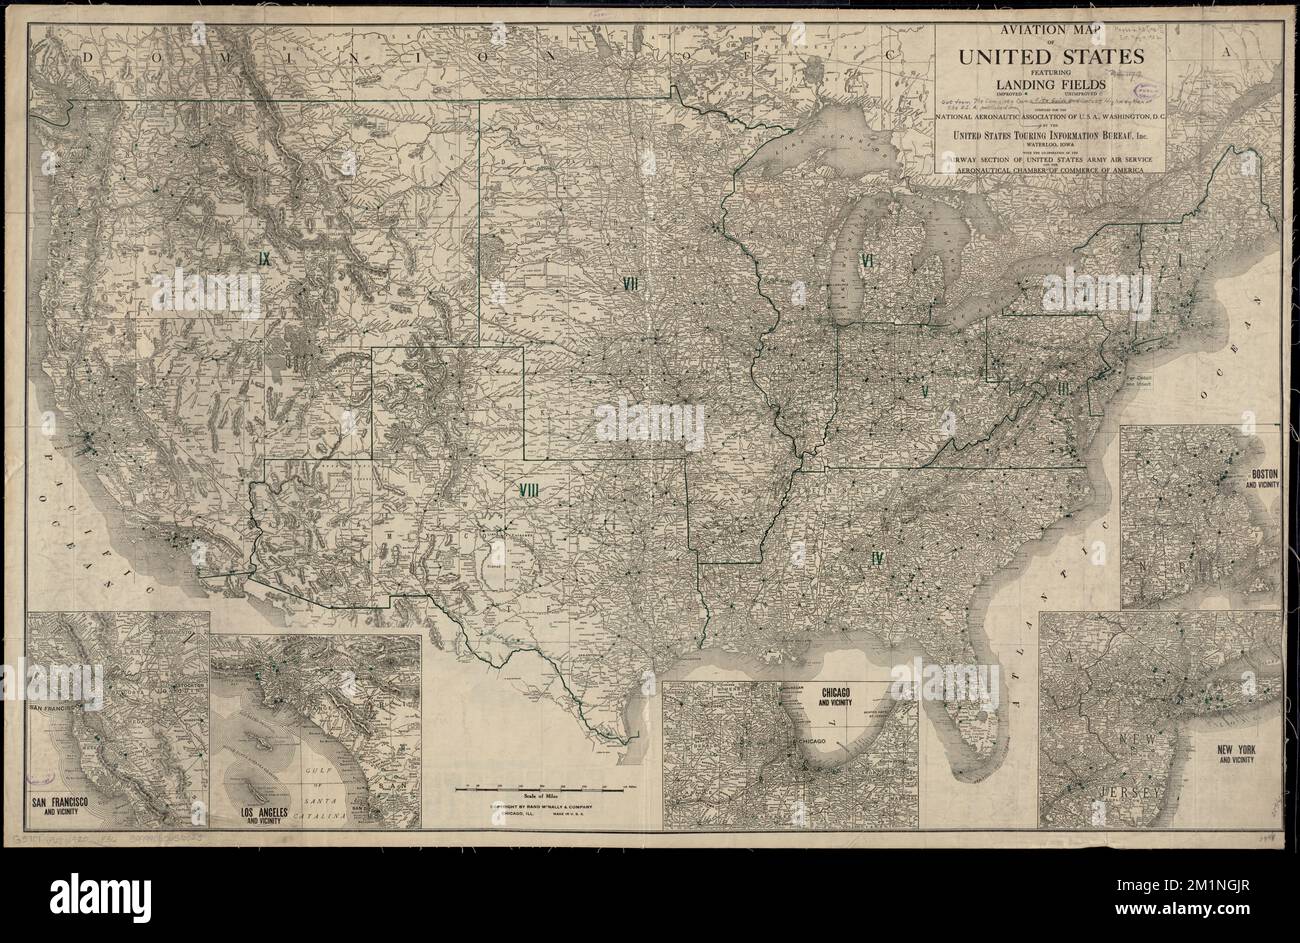 Aviation map of United States : featuring landing fields, improved, unimproved , Camp sites, facilities, etc, United States, Maps, Airports, United States, Maps Norman B. Leventhal Map Center Collection Stock Photo